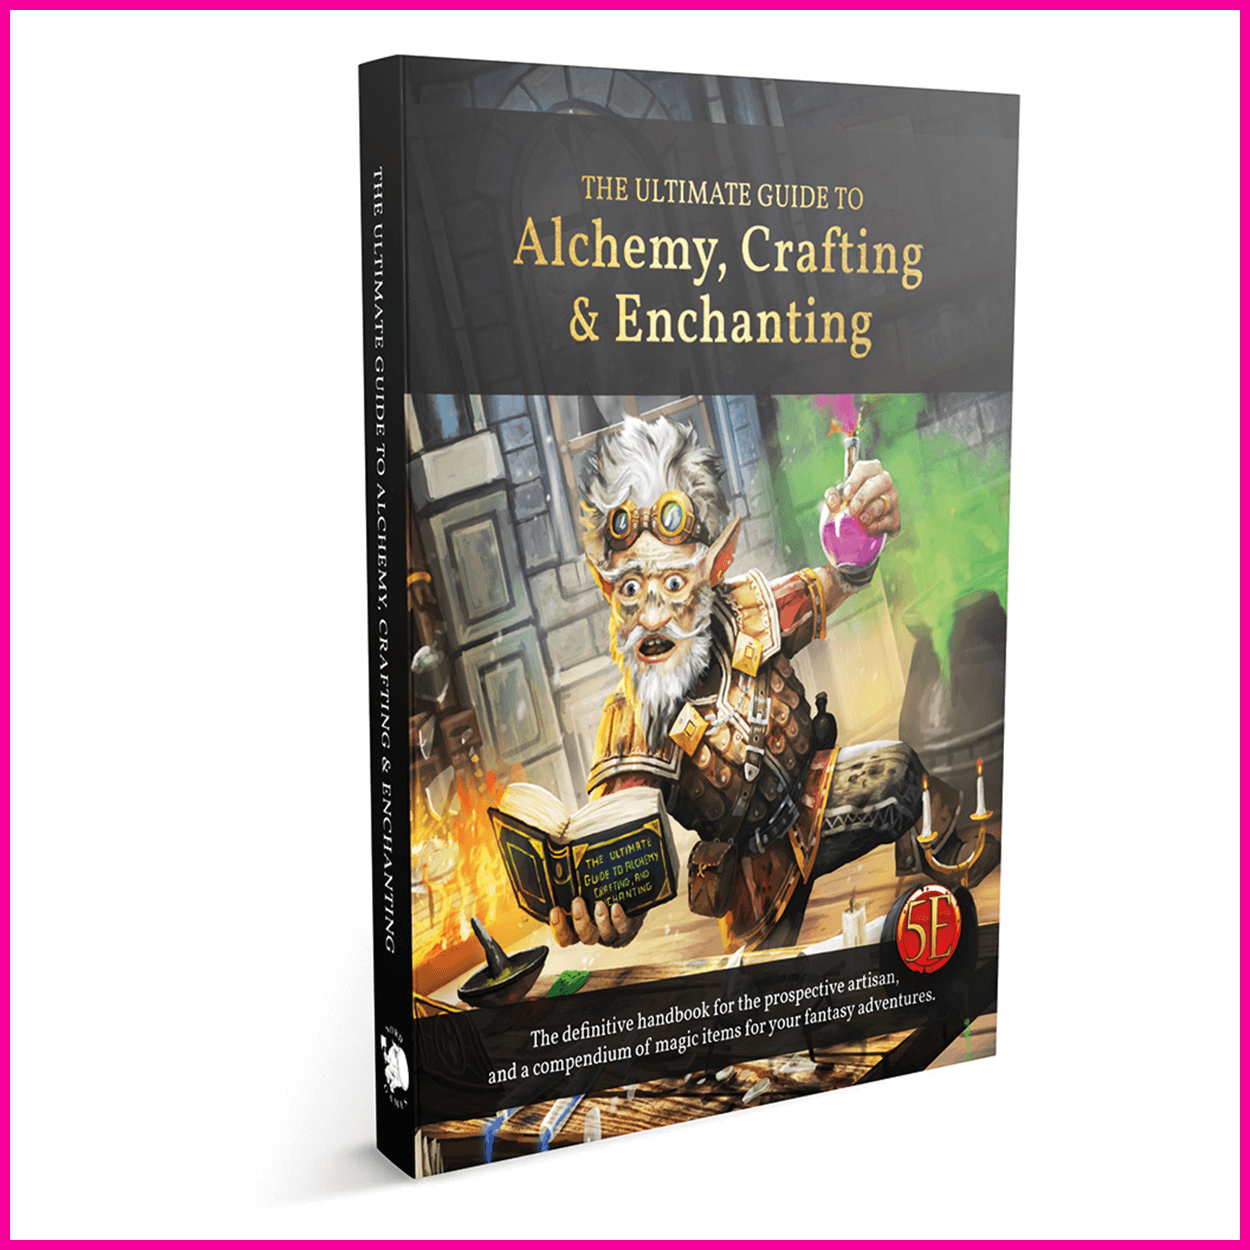 The Ultimate Guide to Alchemy, Crafting & Enchanting Book Cover